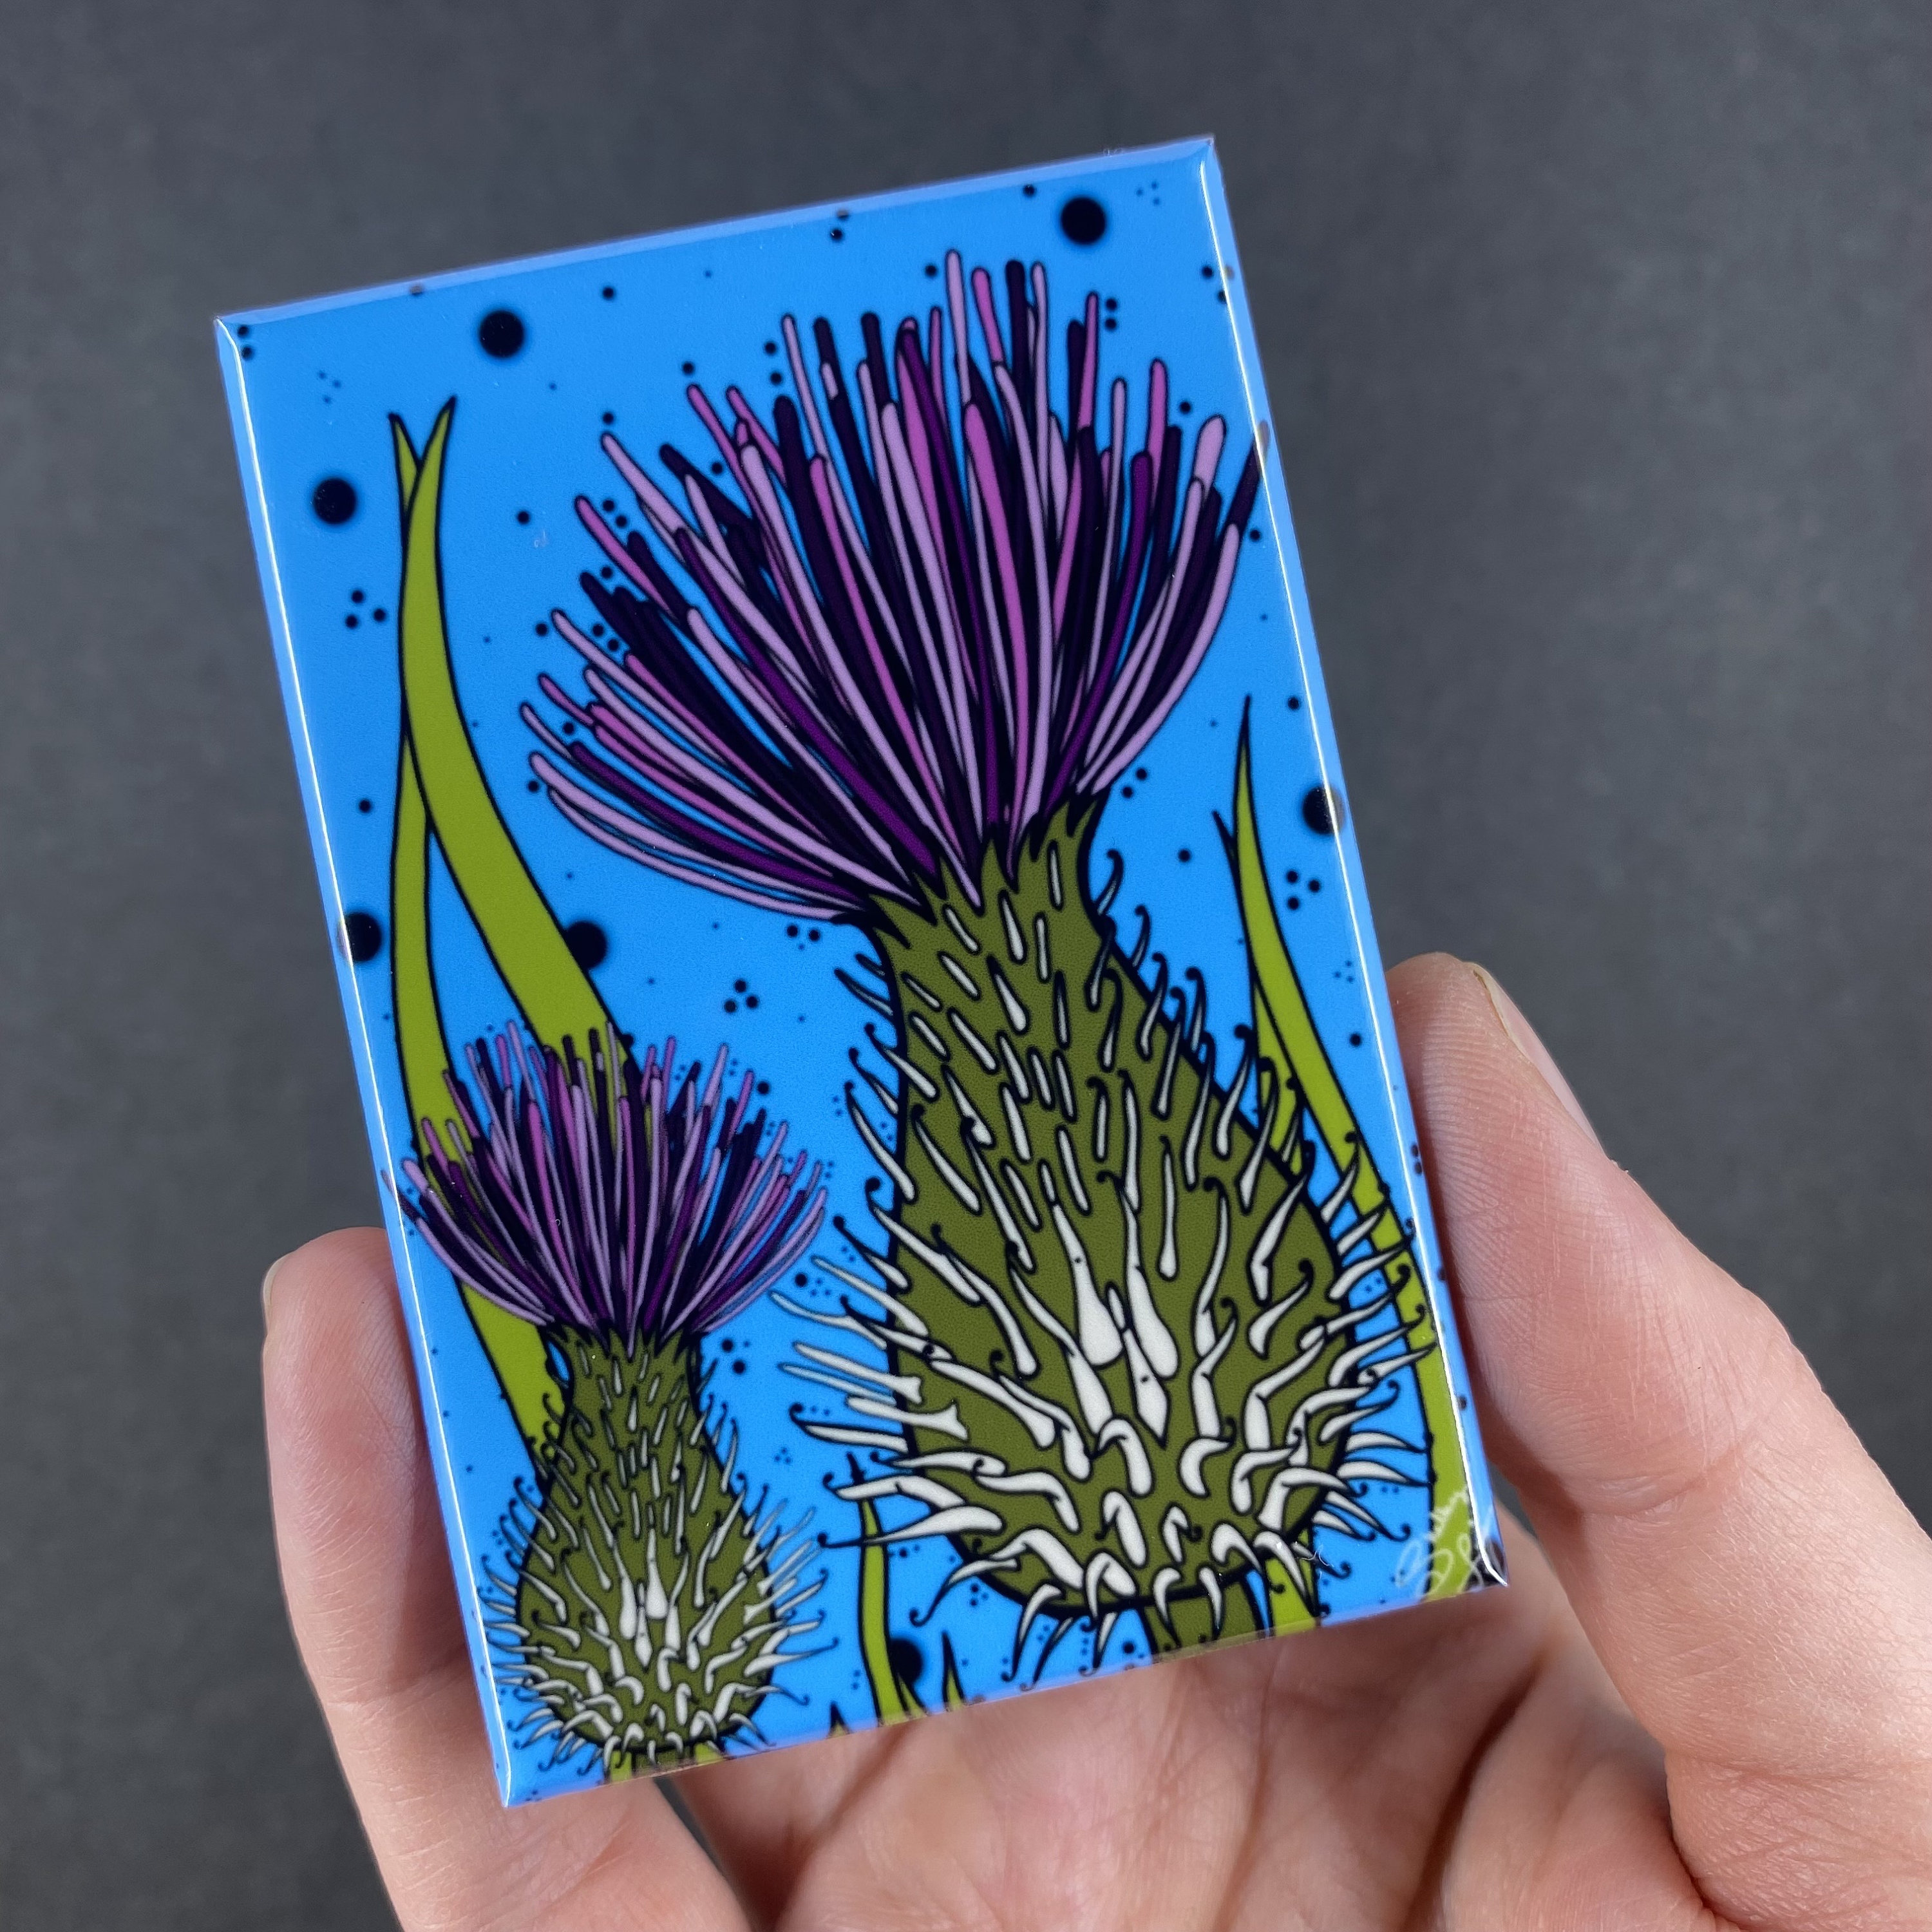 Psychedelic Thistle Magnet, Wildflower Decor, Prairie Flower Print, Thistle  Art, Gift for Hikers & Nature Enthusiasts, Set or Single Magnet